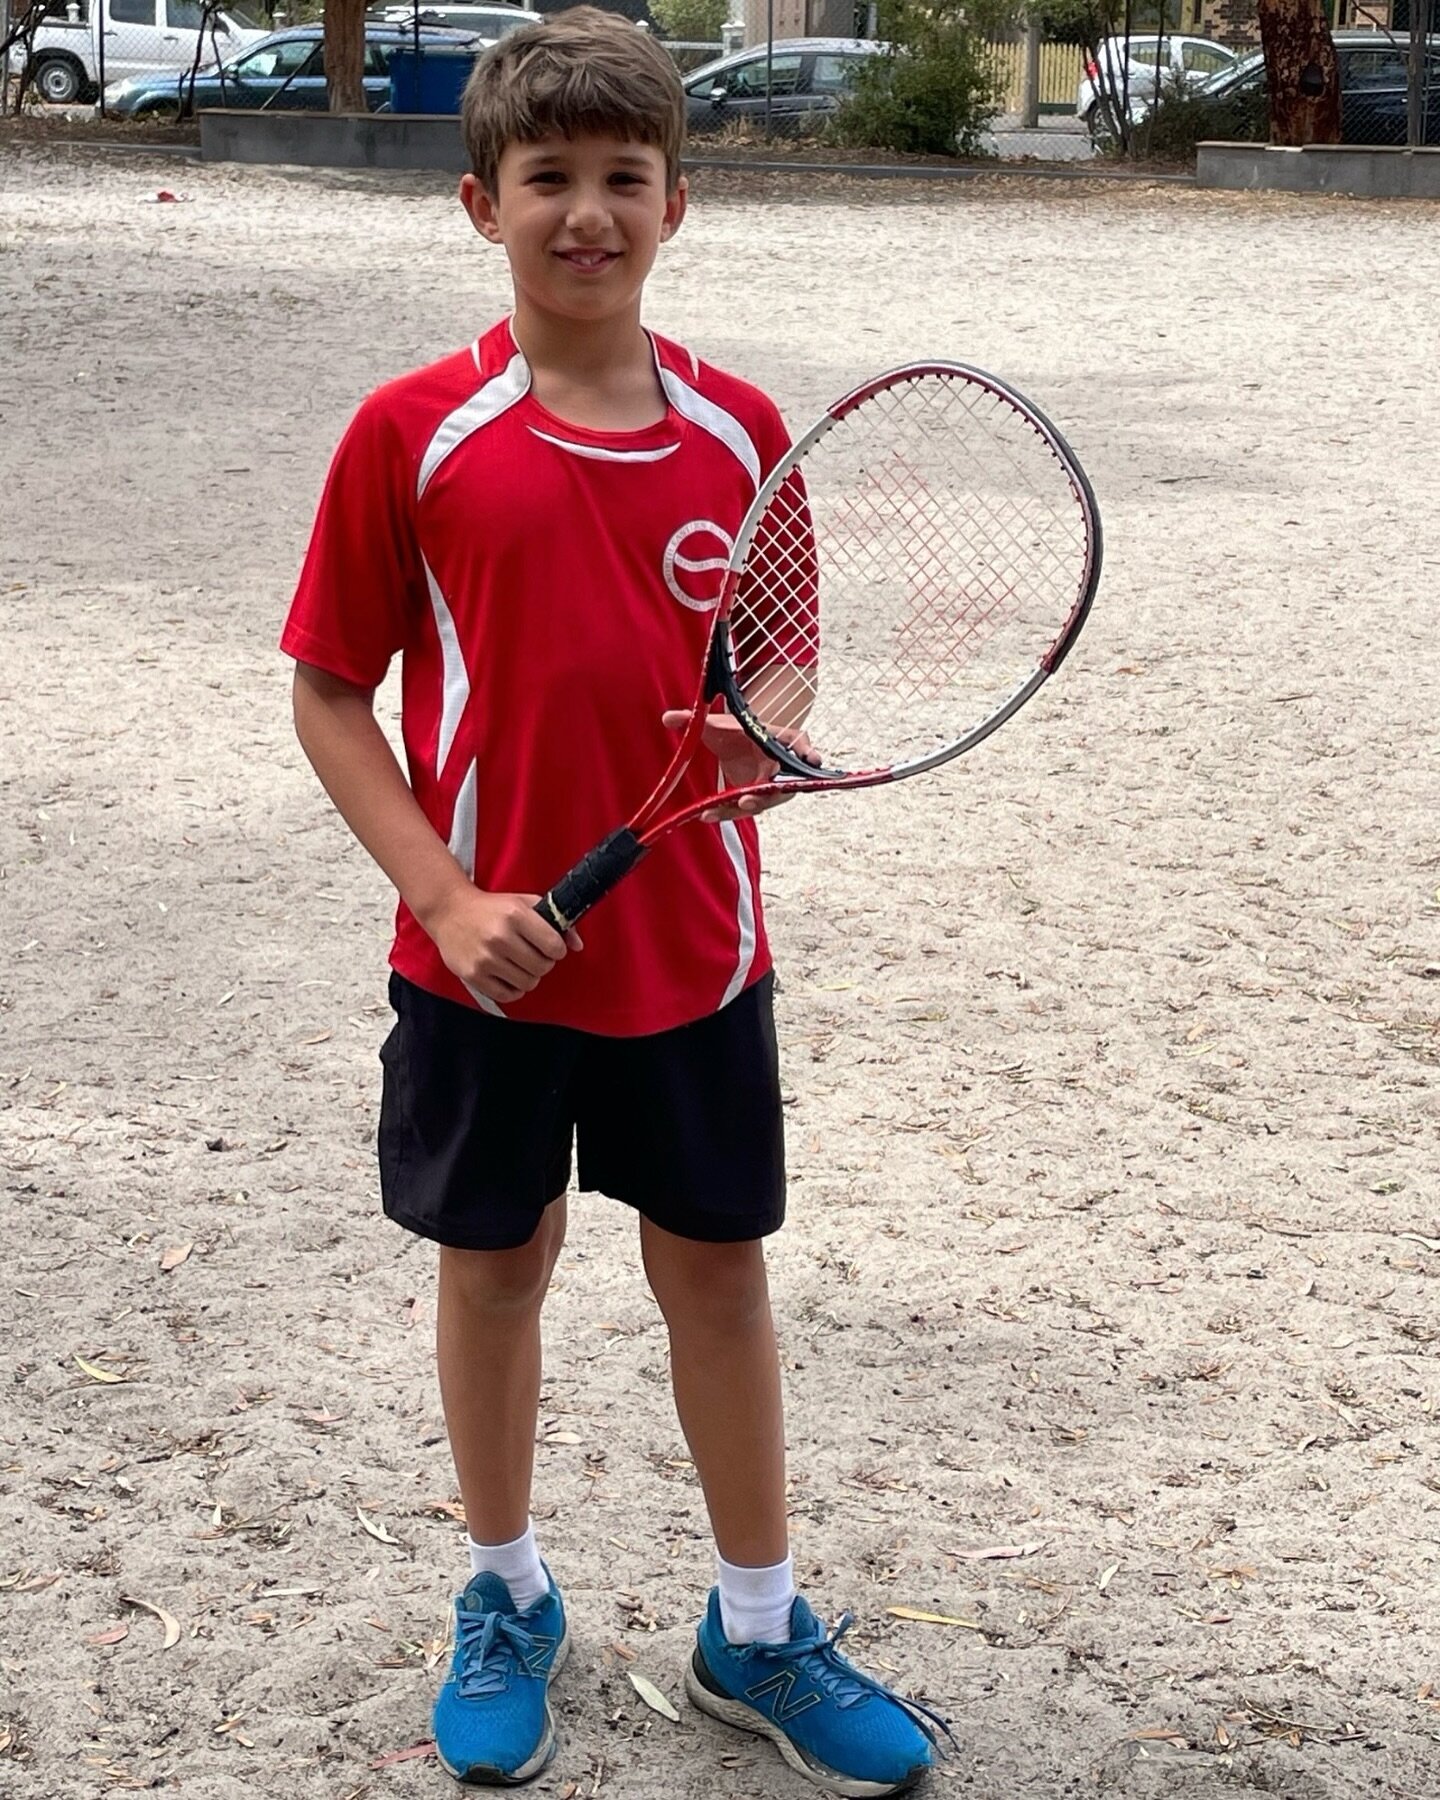 Zach represented FNPS at the division tennis tournament. 🎾
He did such a wonderful job getting to this level after winning the Carlton district. 
We&rsquo;re very proud of the efforts and hours he puts in before and after school. 👏

&nbsp;#FNPS #fi